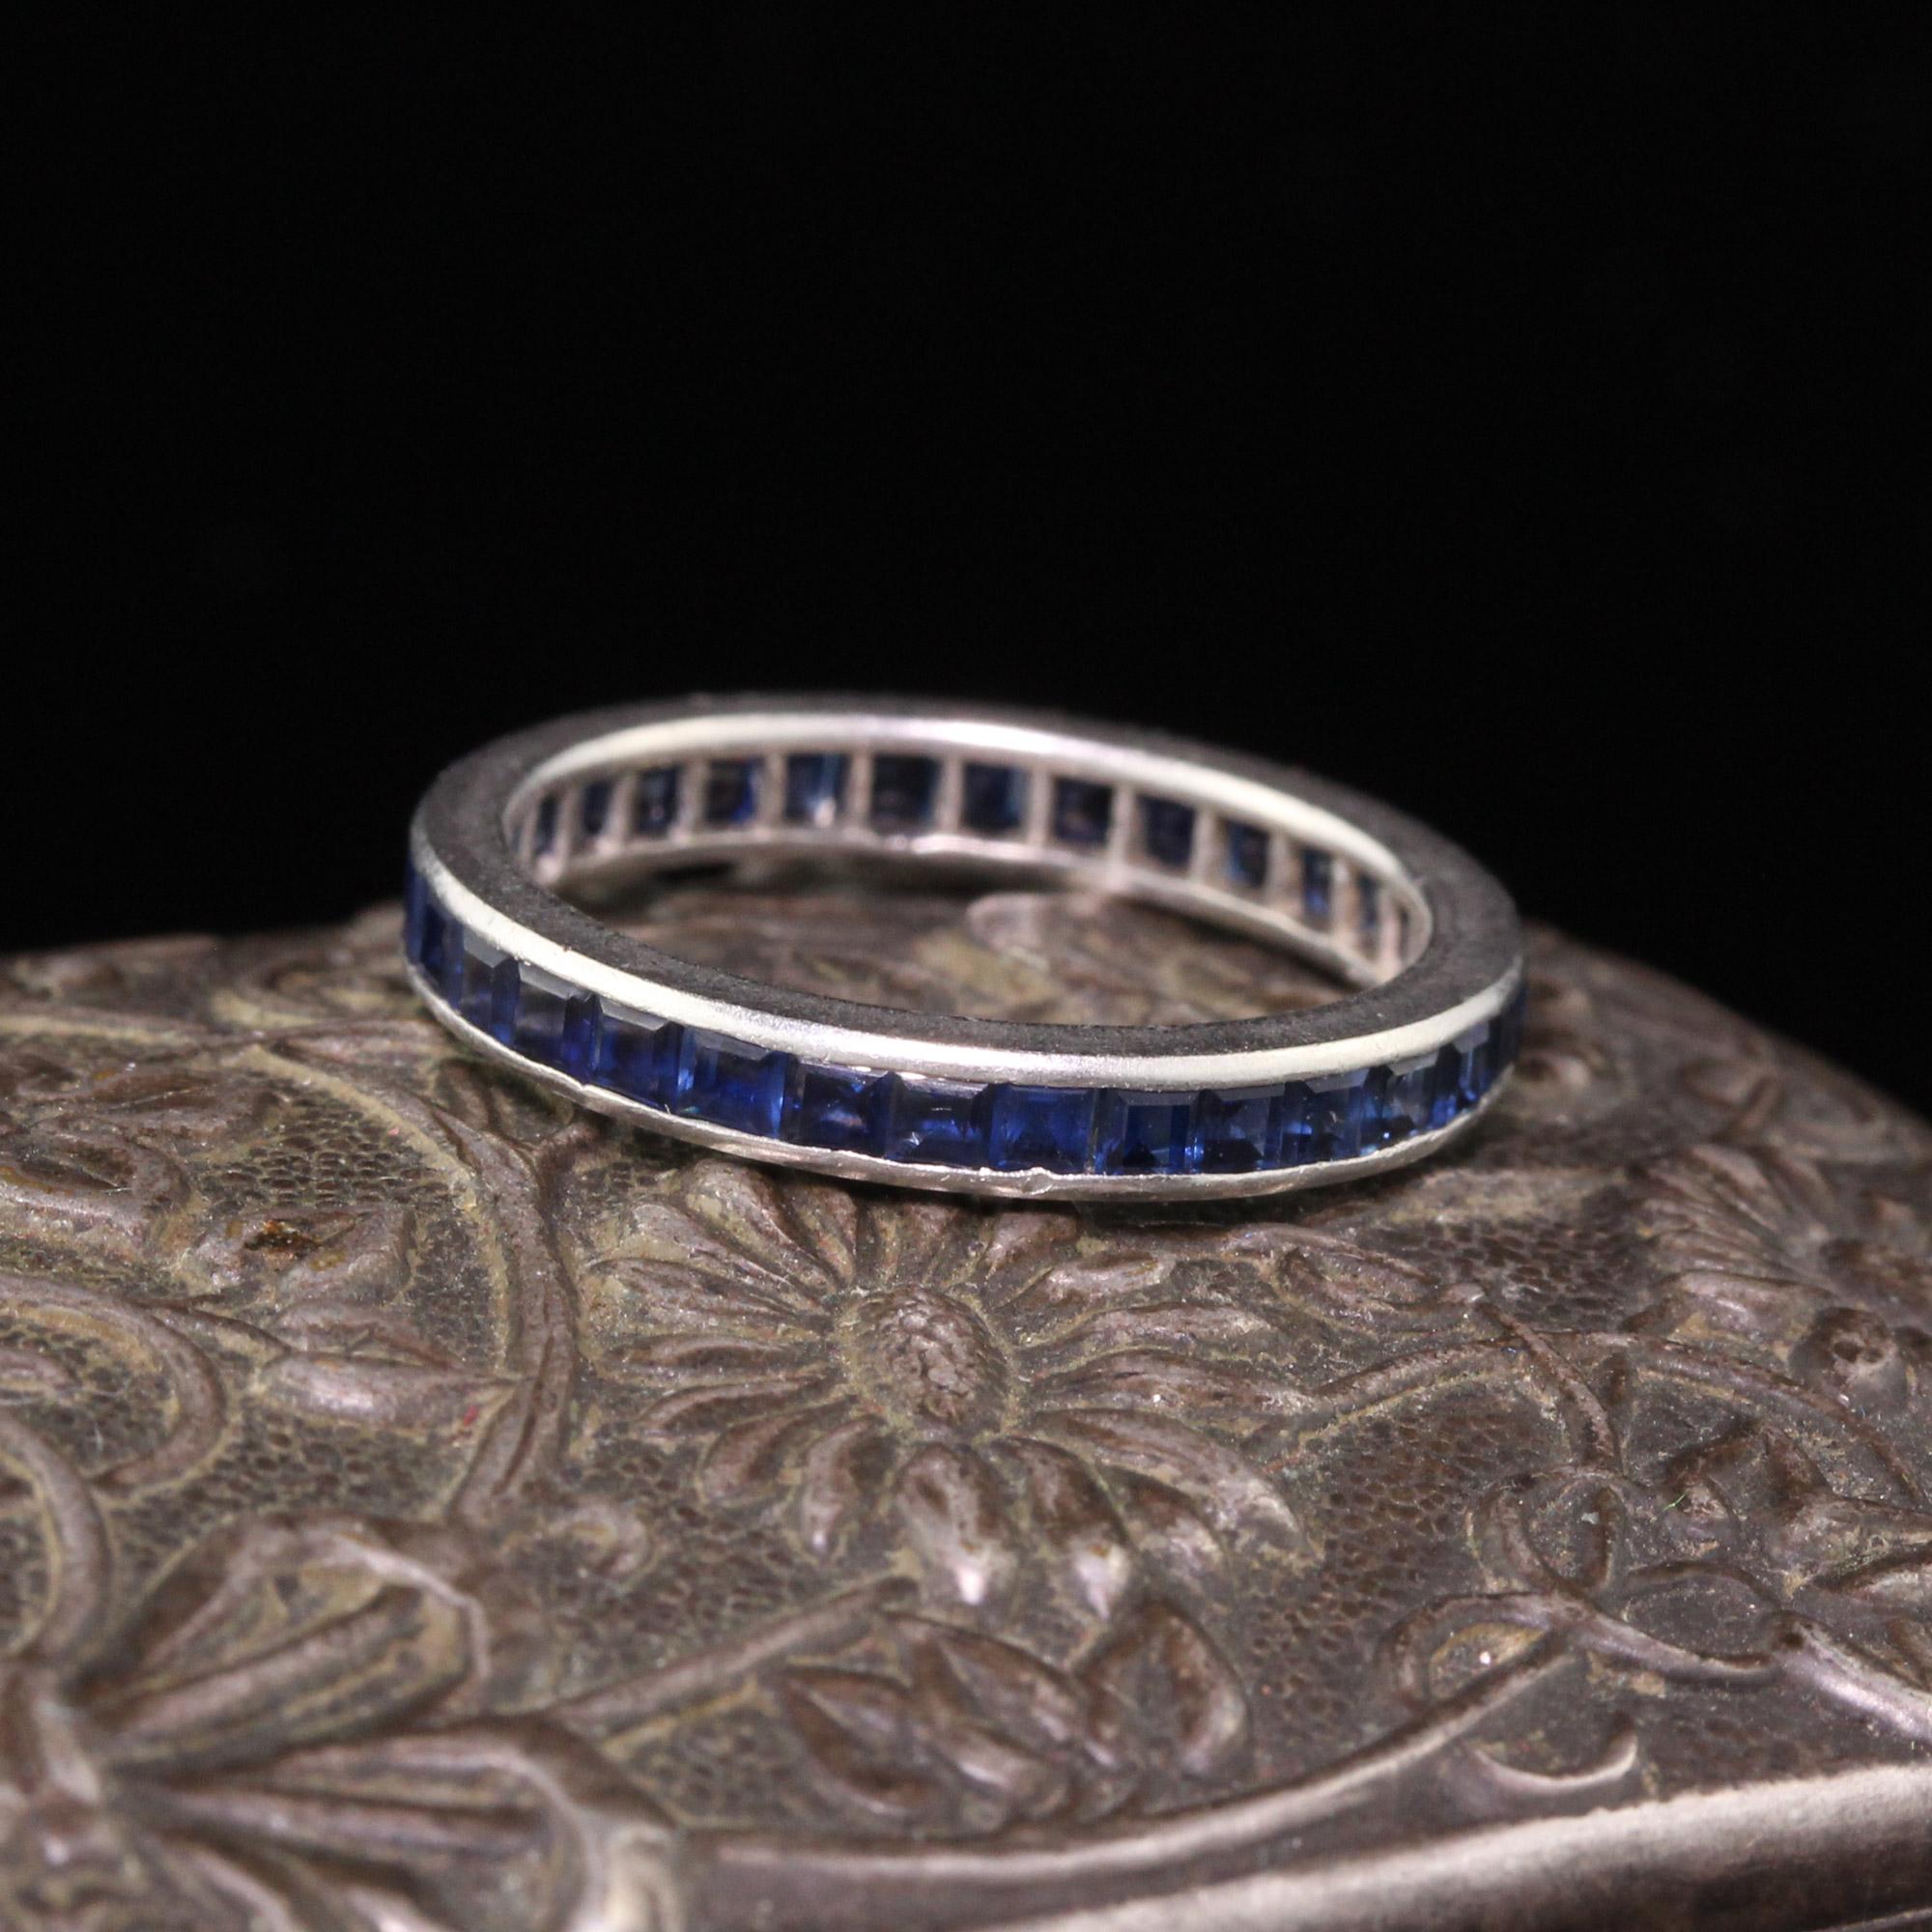 Gorgeous Art Deco Tiffany & Co platinum sapphire eternity band with square cut sapphires. The ring is in good condition. 

#R0349

Metal: Platinum 

Weight: 2.5 Grams

Ring Size: 5

*Unfortunately this ring cannot be sized.

Measurements: 2.63 mm